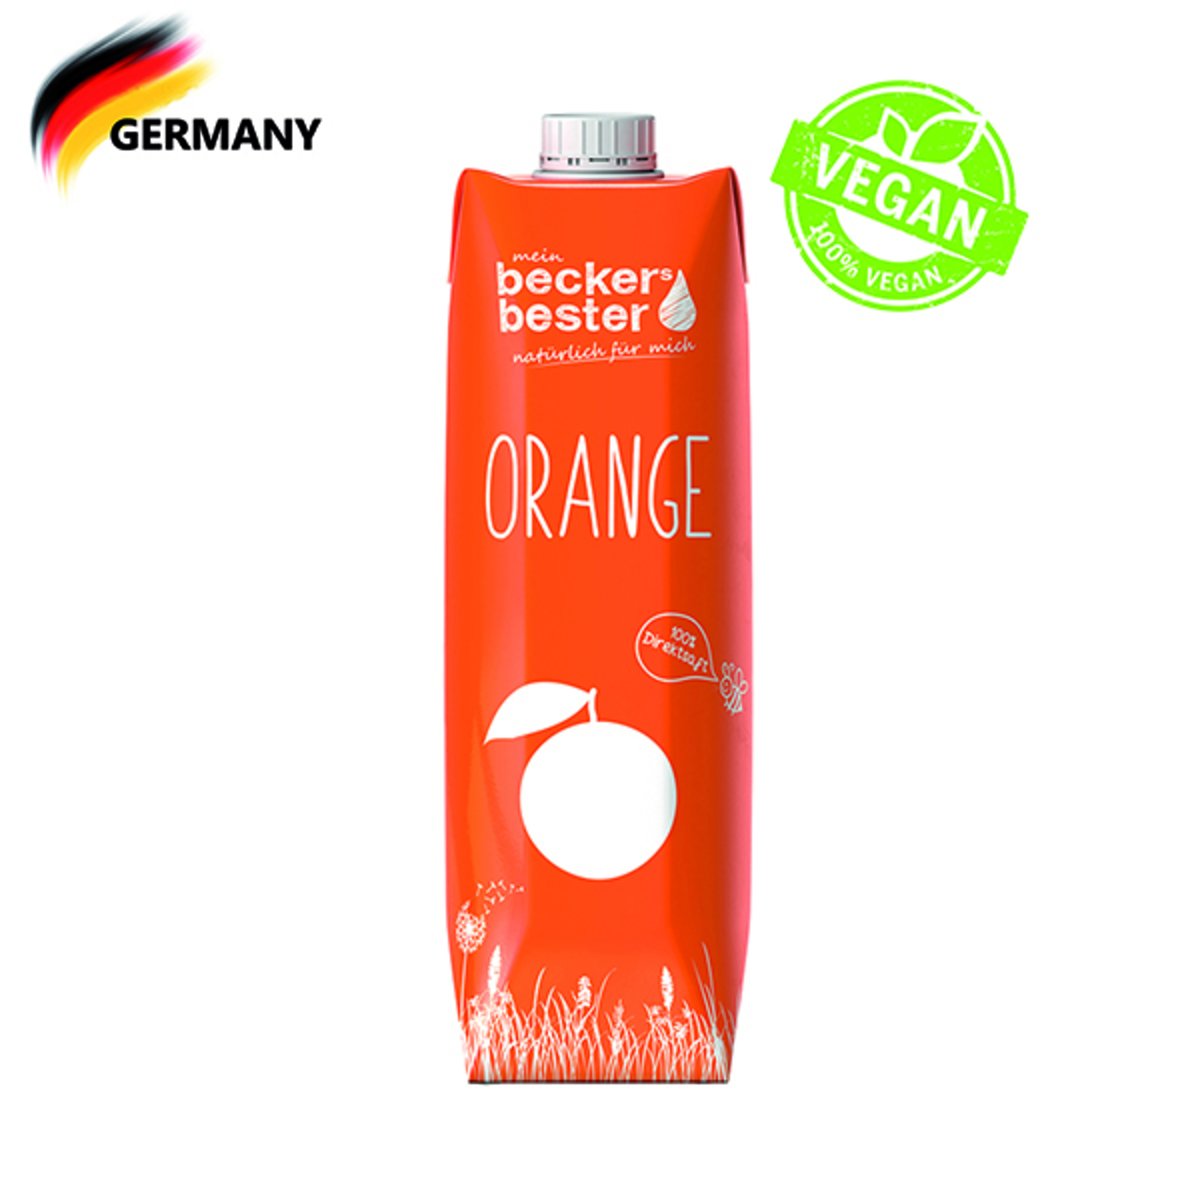 100% Direct Pressed Orange Juice (Not-From-Concentrate) 1L